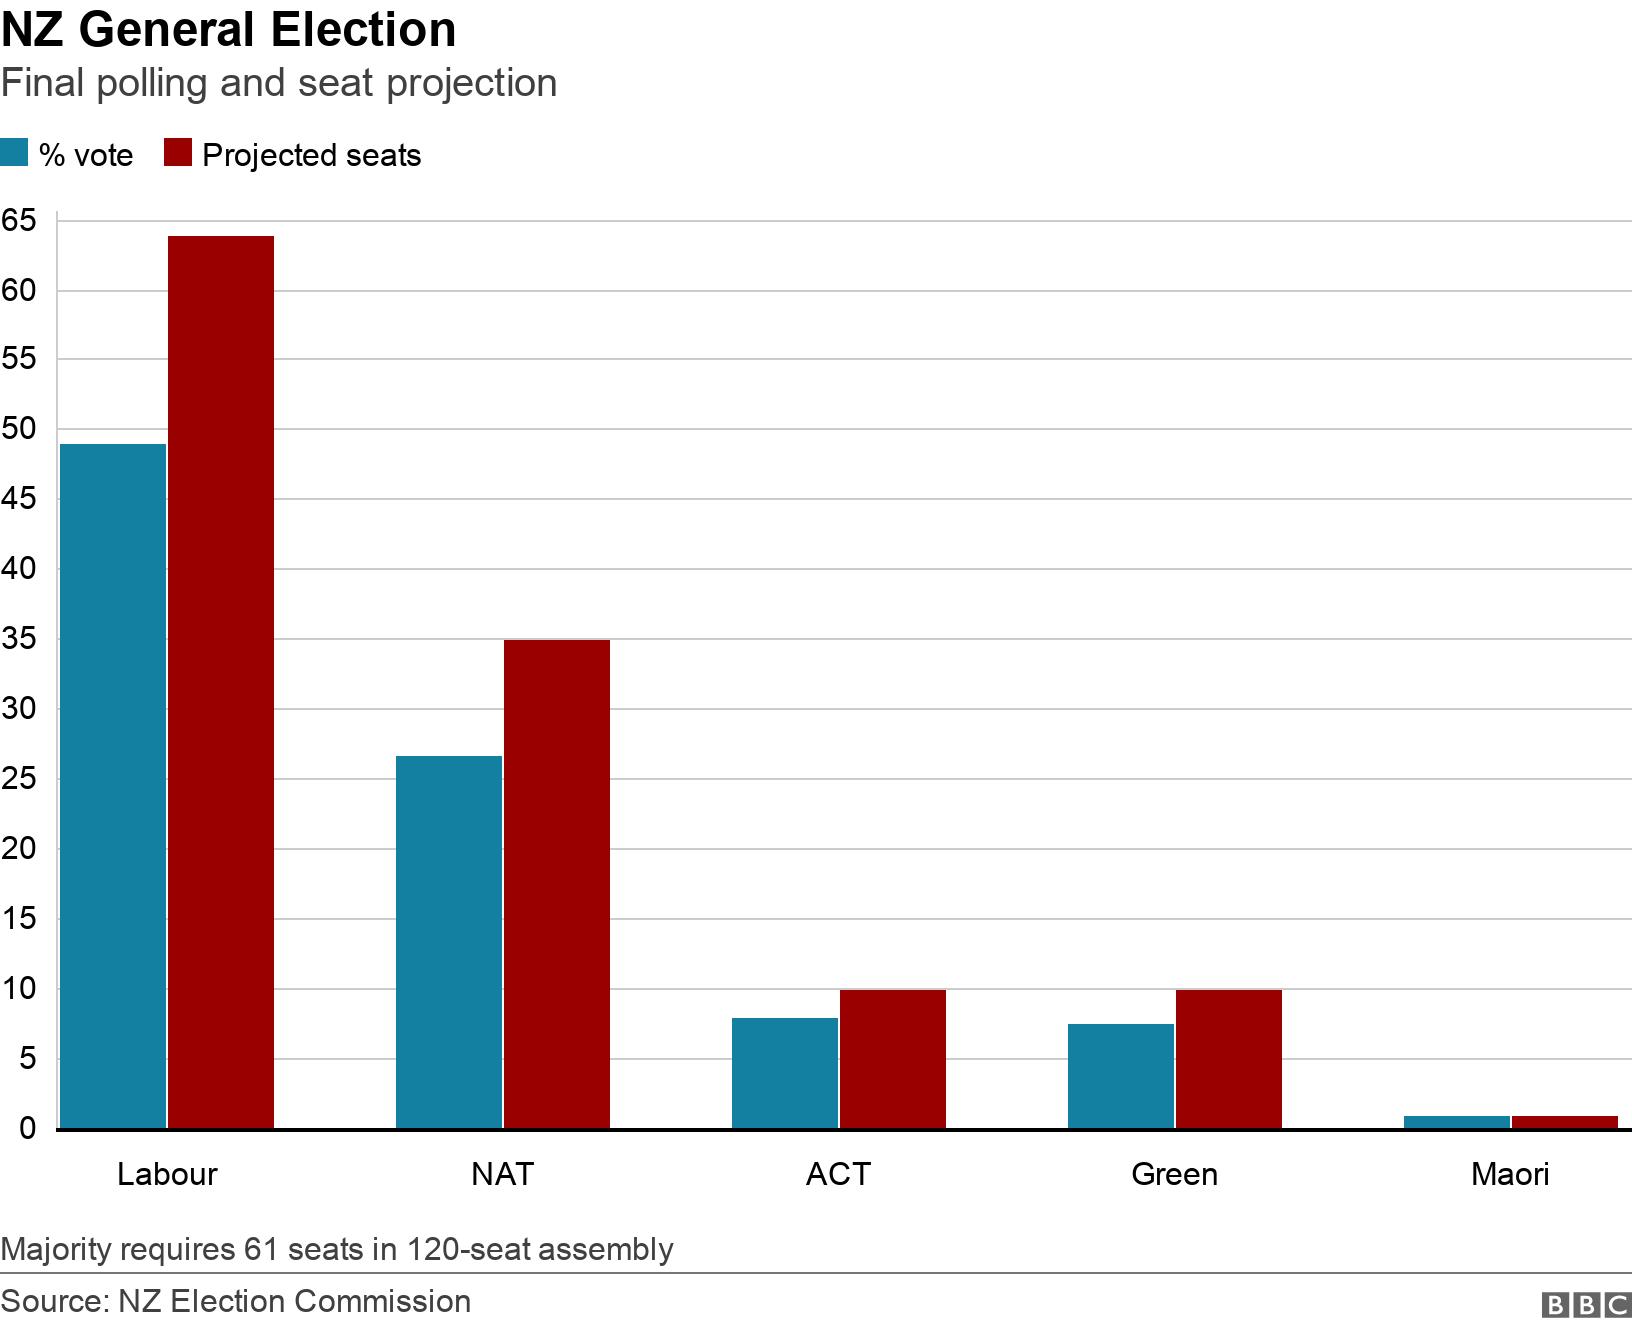 NZ General Election. Final polling and seat projection.  Majority requires 61 seats in 120-seat assembly.